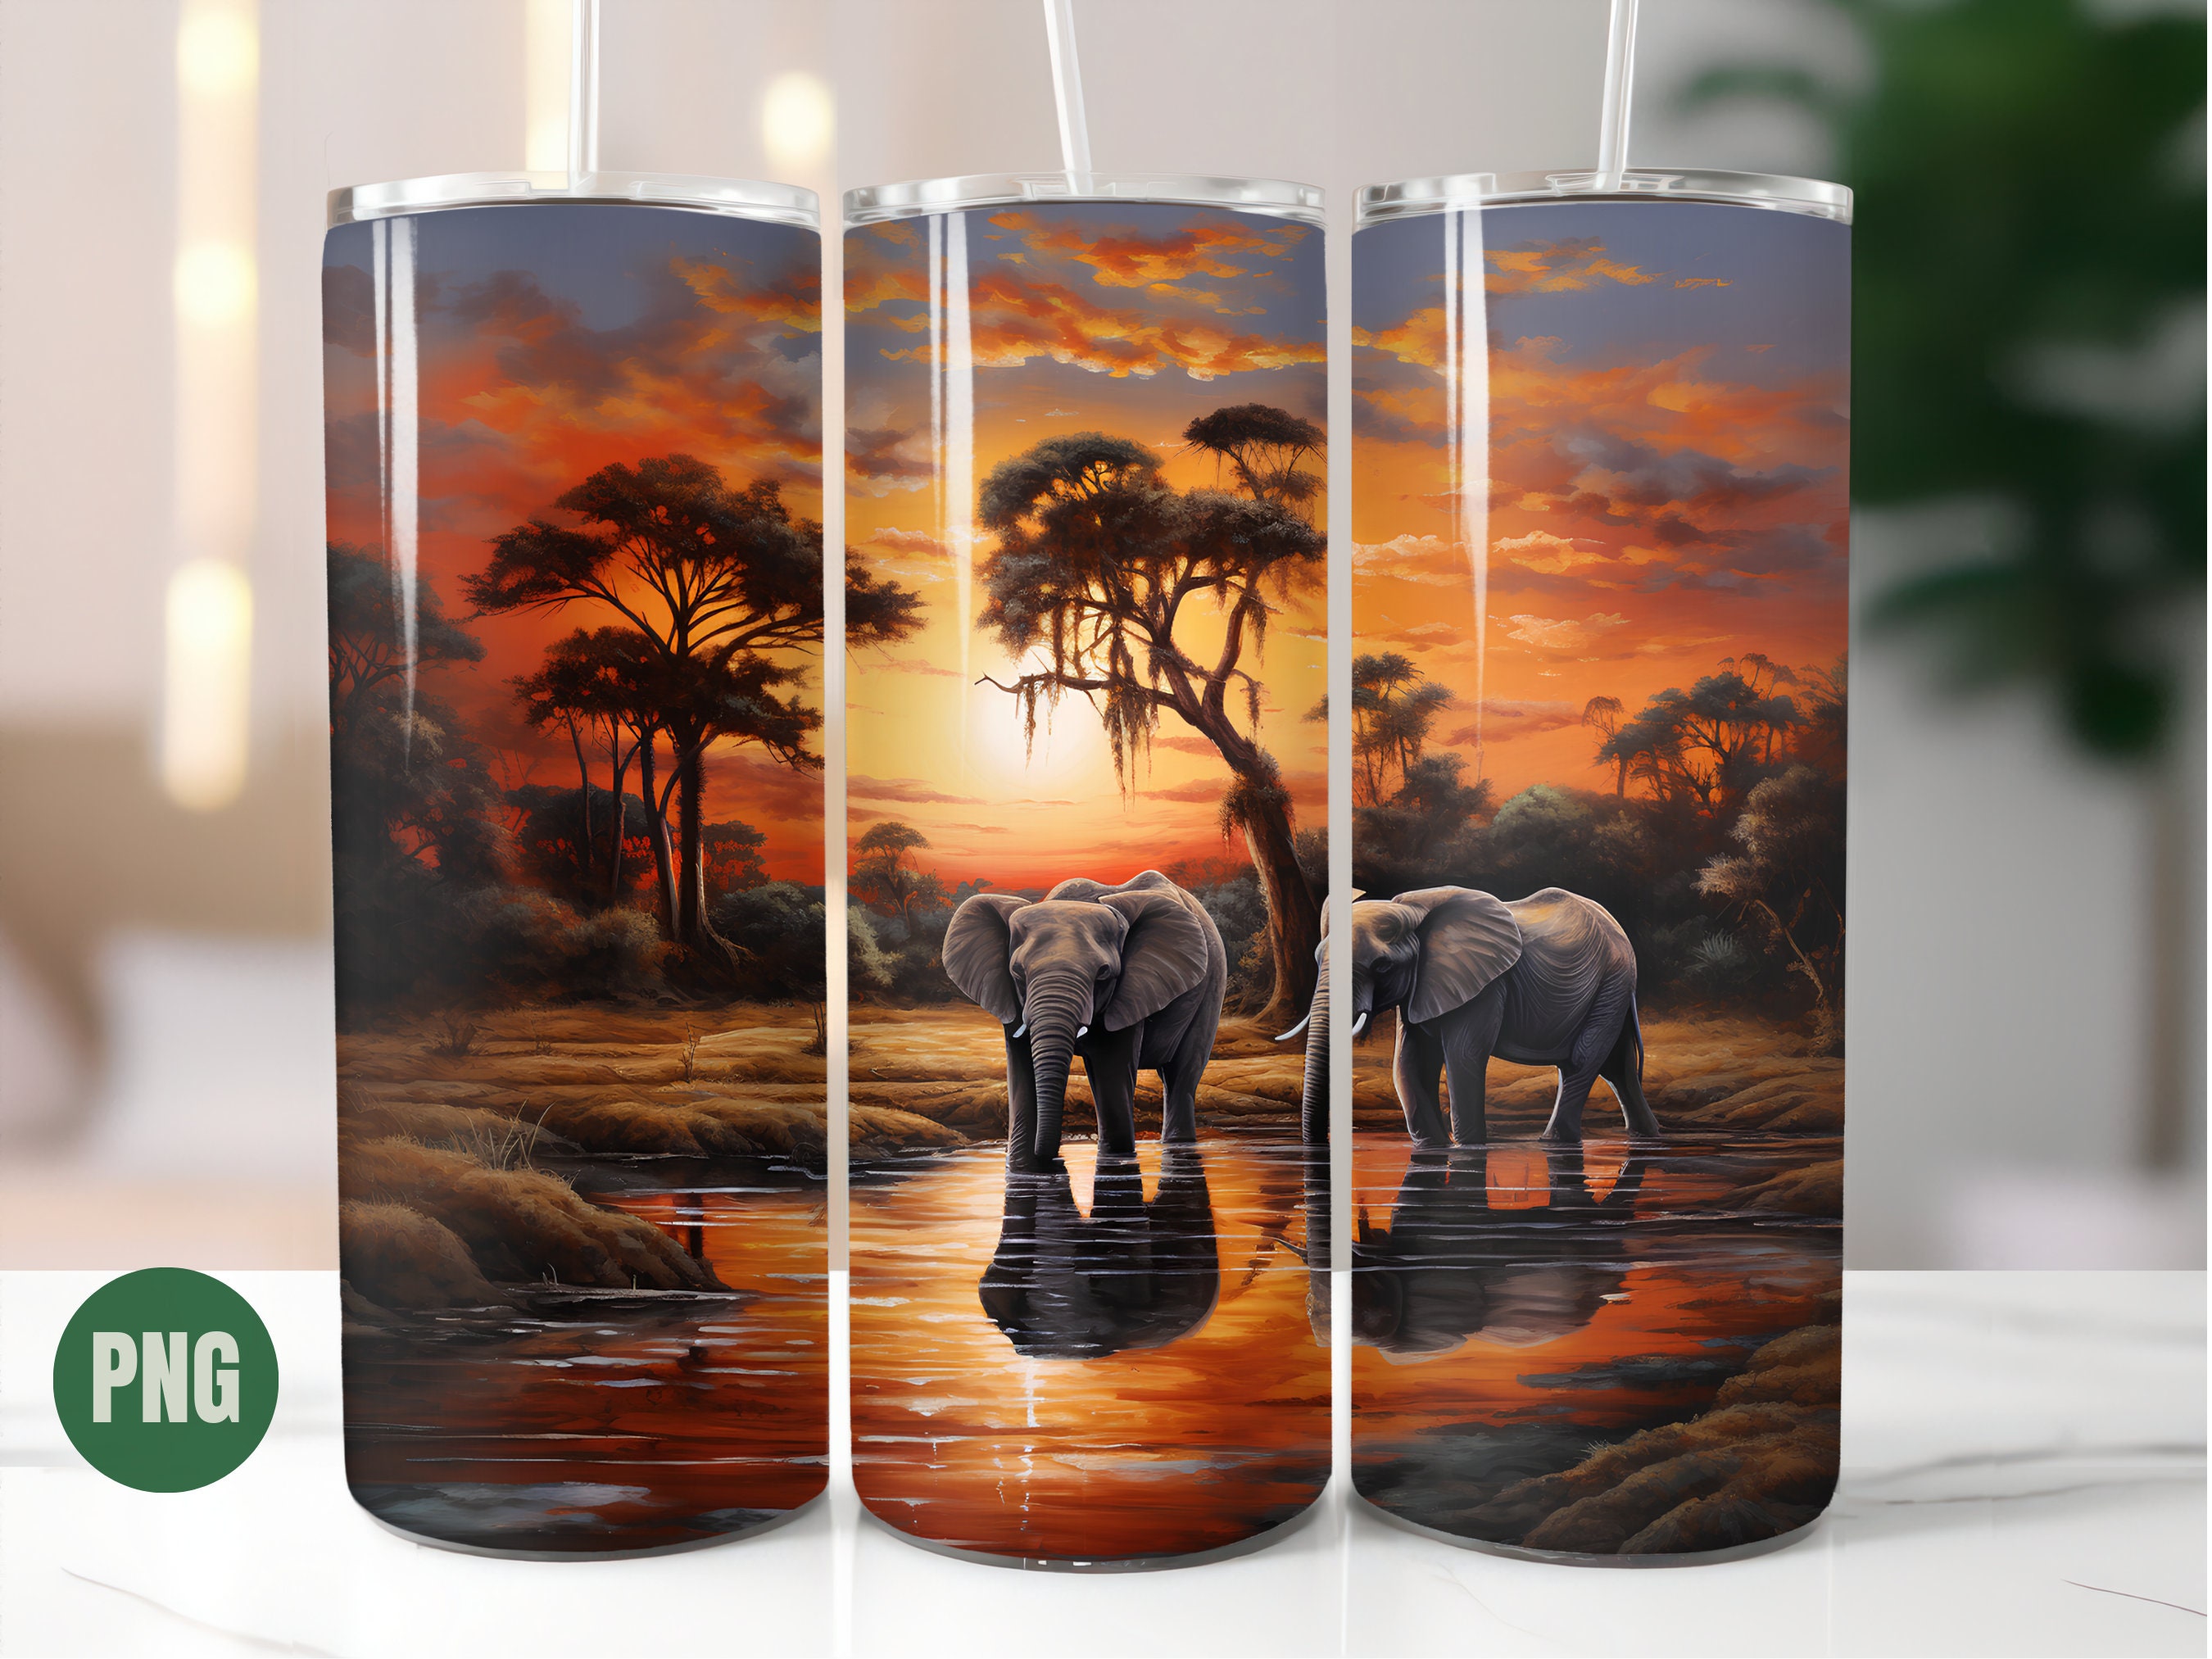 Elephant Tumbler Accessories Graphic by SmartTemple · Creative Fabrica